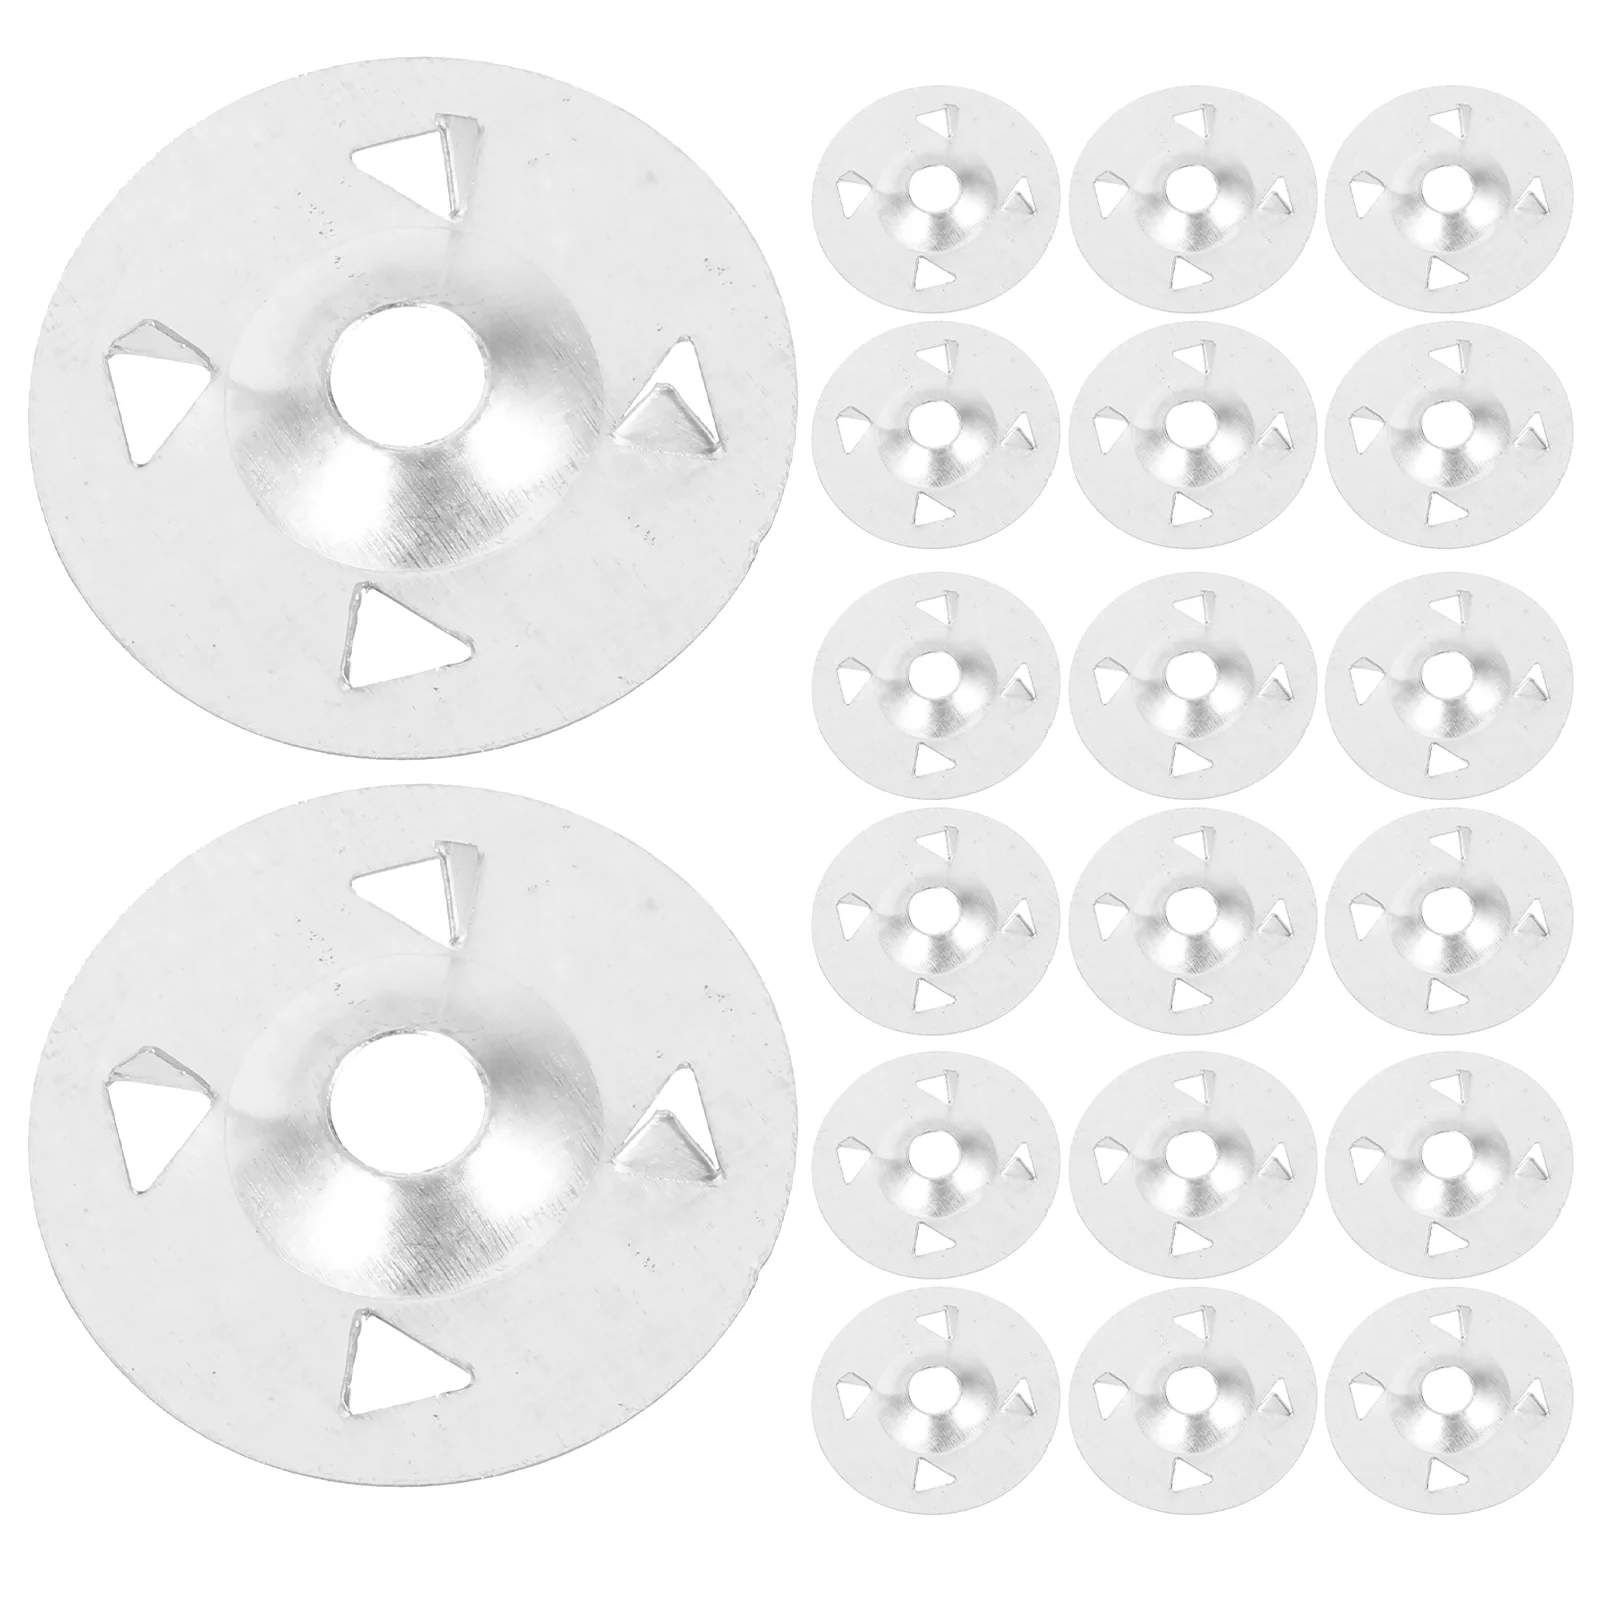 

100 Pcs Ceiling Insulation Board Shims Foam Washers Expansion Nail Load Fastener Iron Replacement Insulating